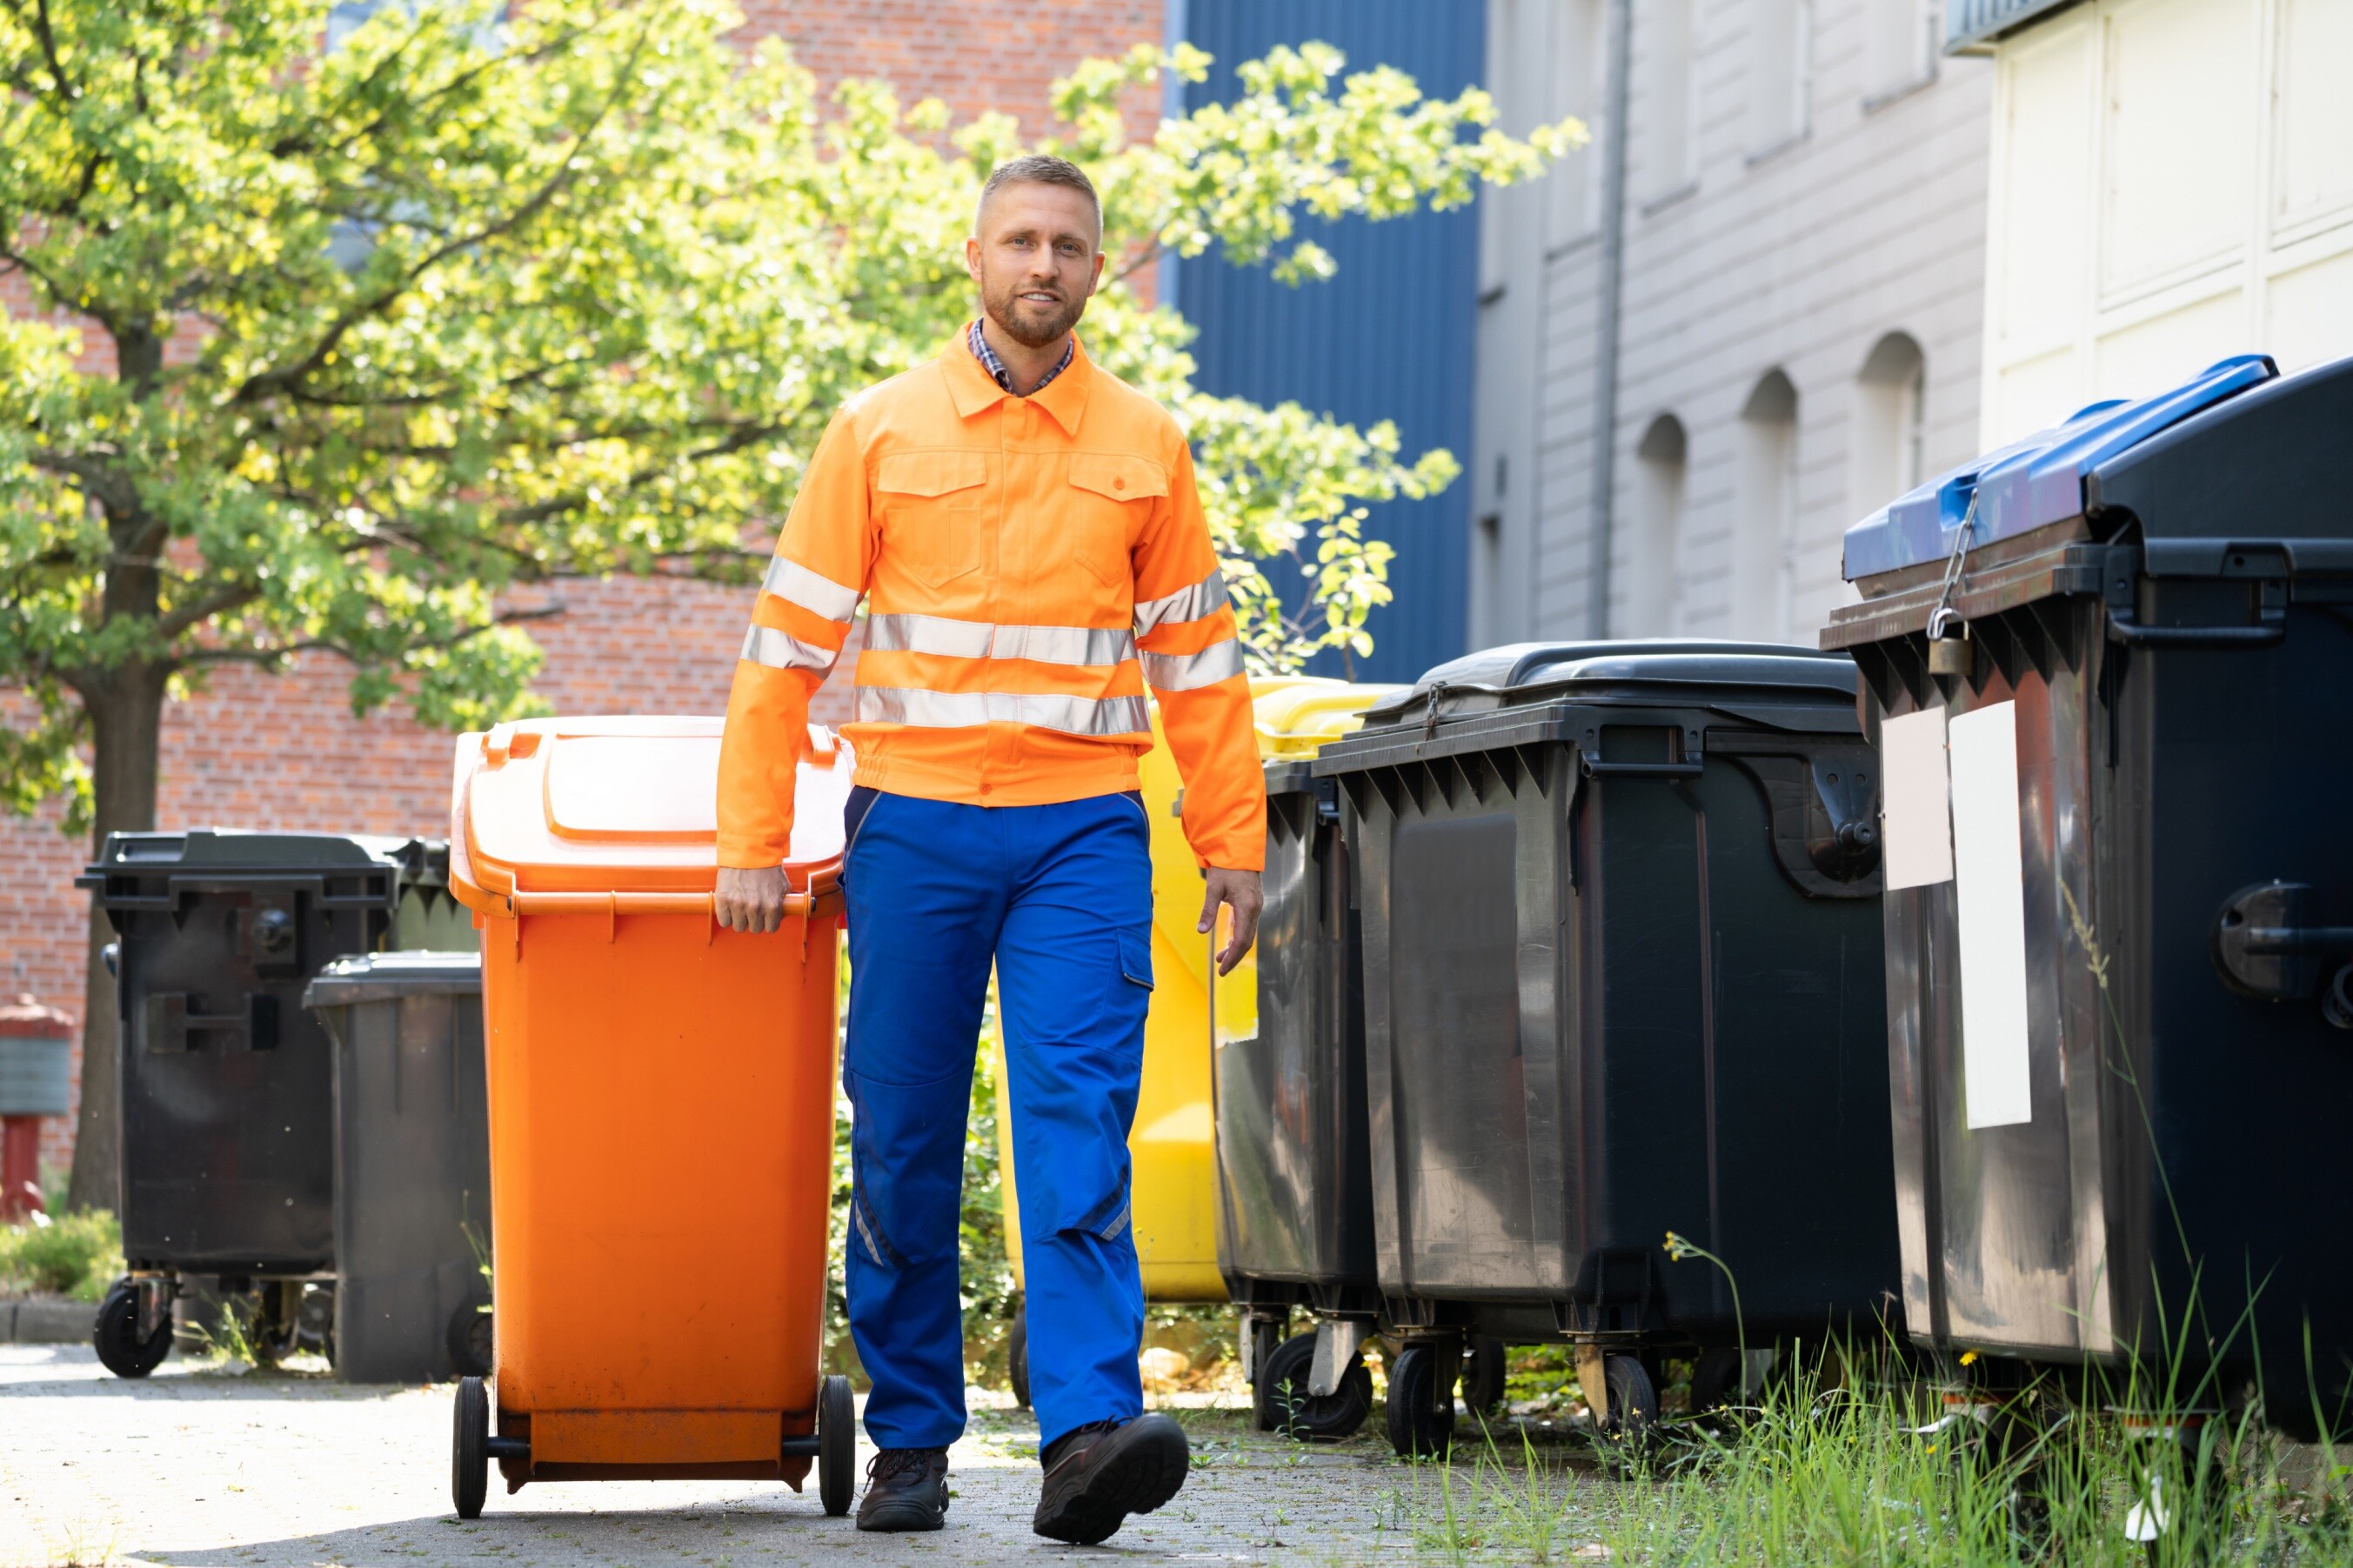 Garbage removal man doing household waste and rubbish collection.